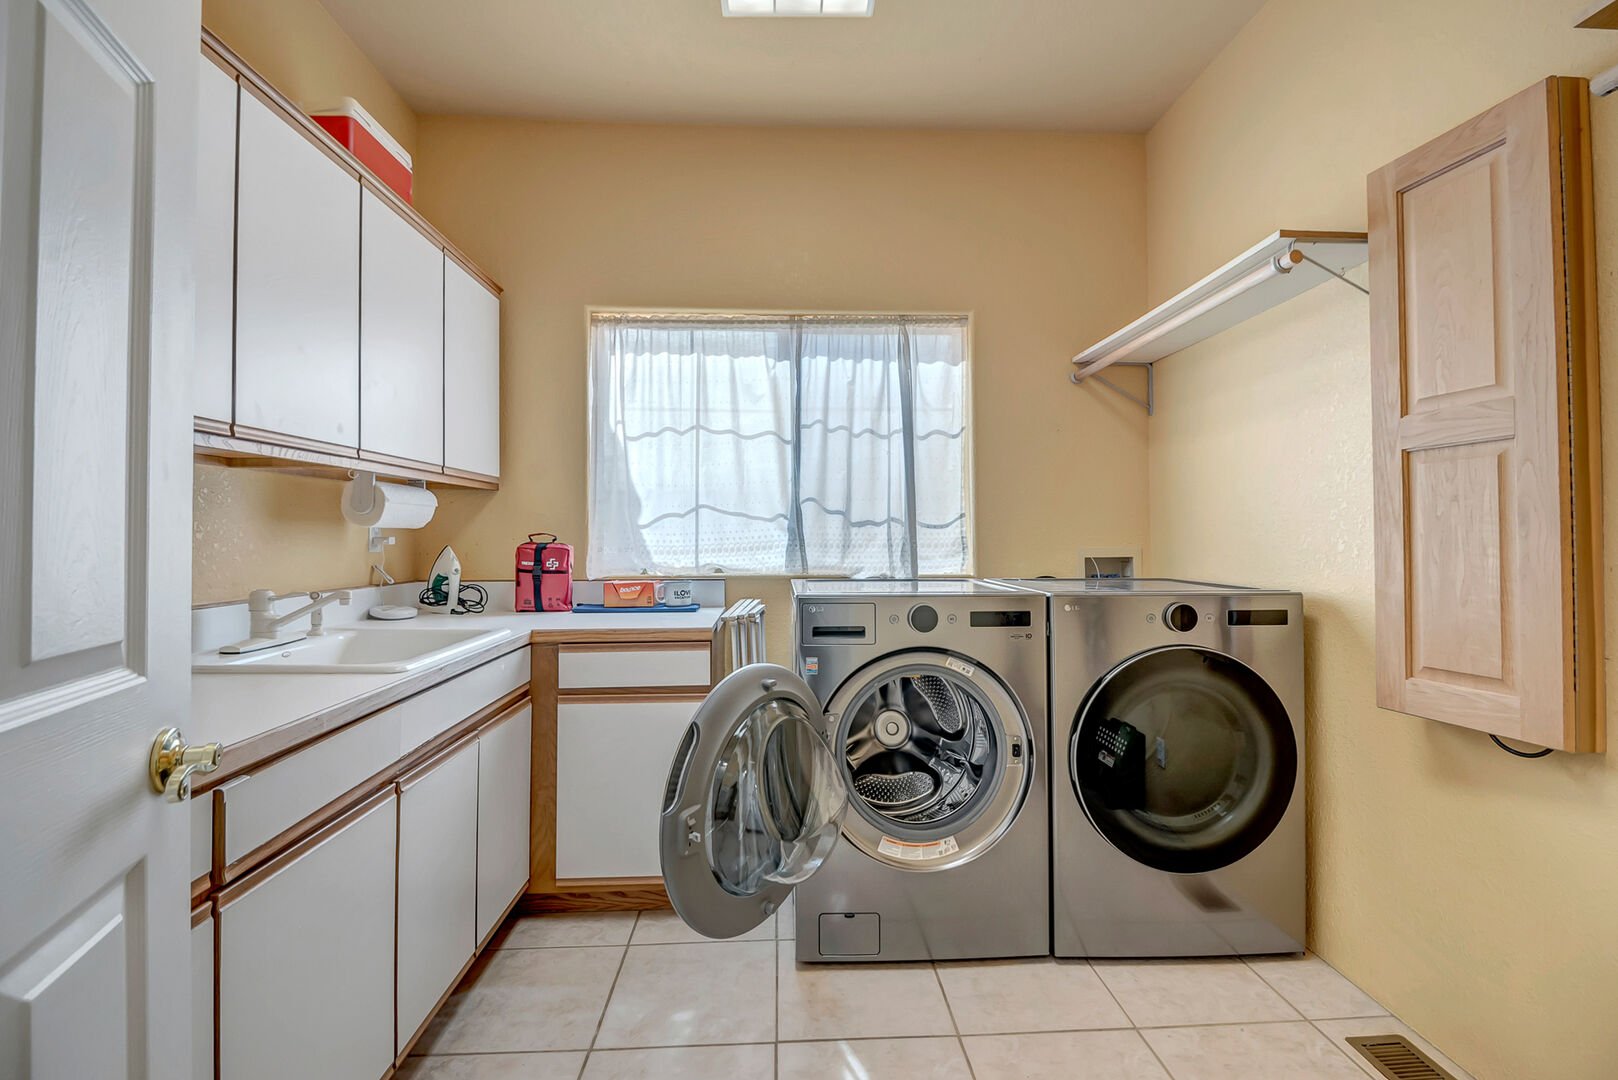 Laundry room with full-size washer & dryer